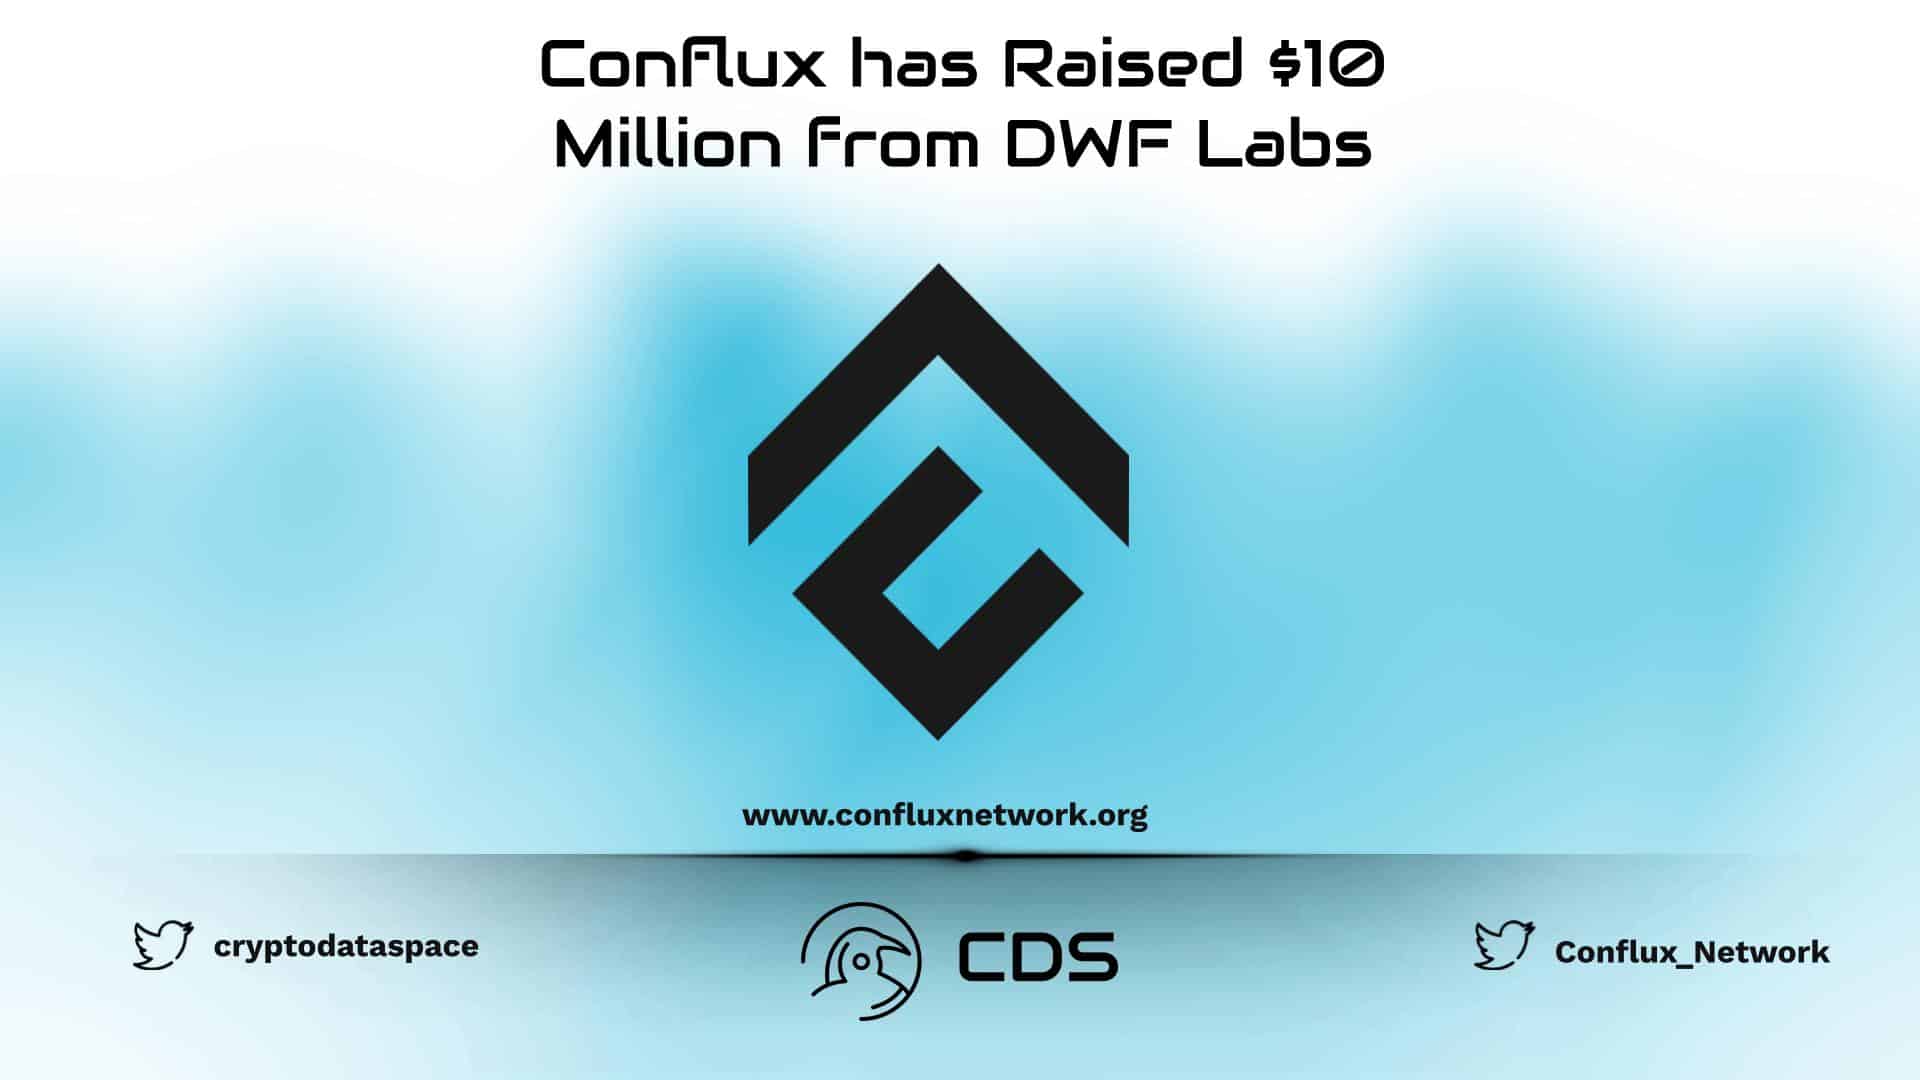 Conflux has Raised $10 Million from DWF Labs